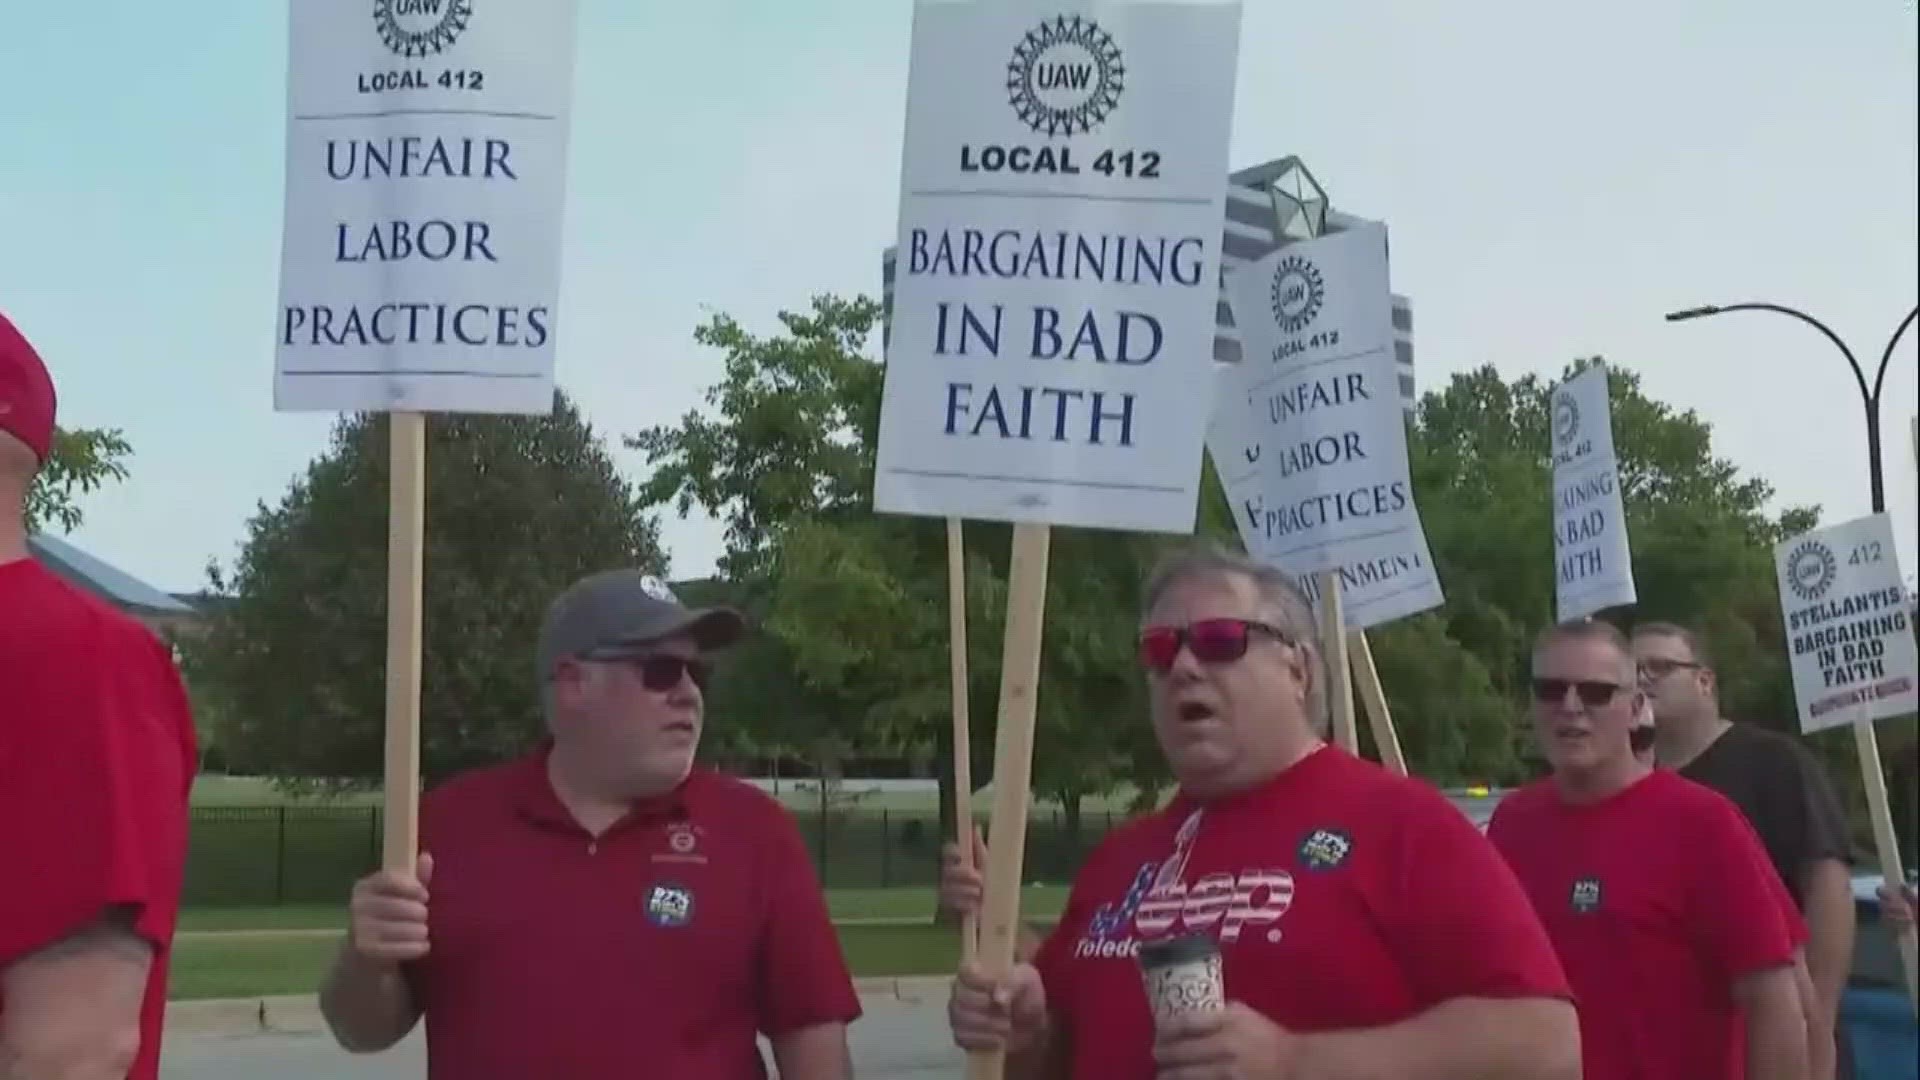 "We will be striking  38 locations, across 20 states, across all 9 regions of the UAW," says Union President Shawn Fain.